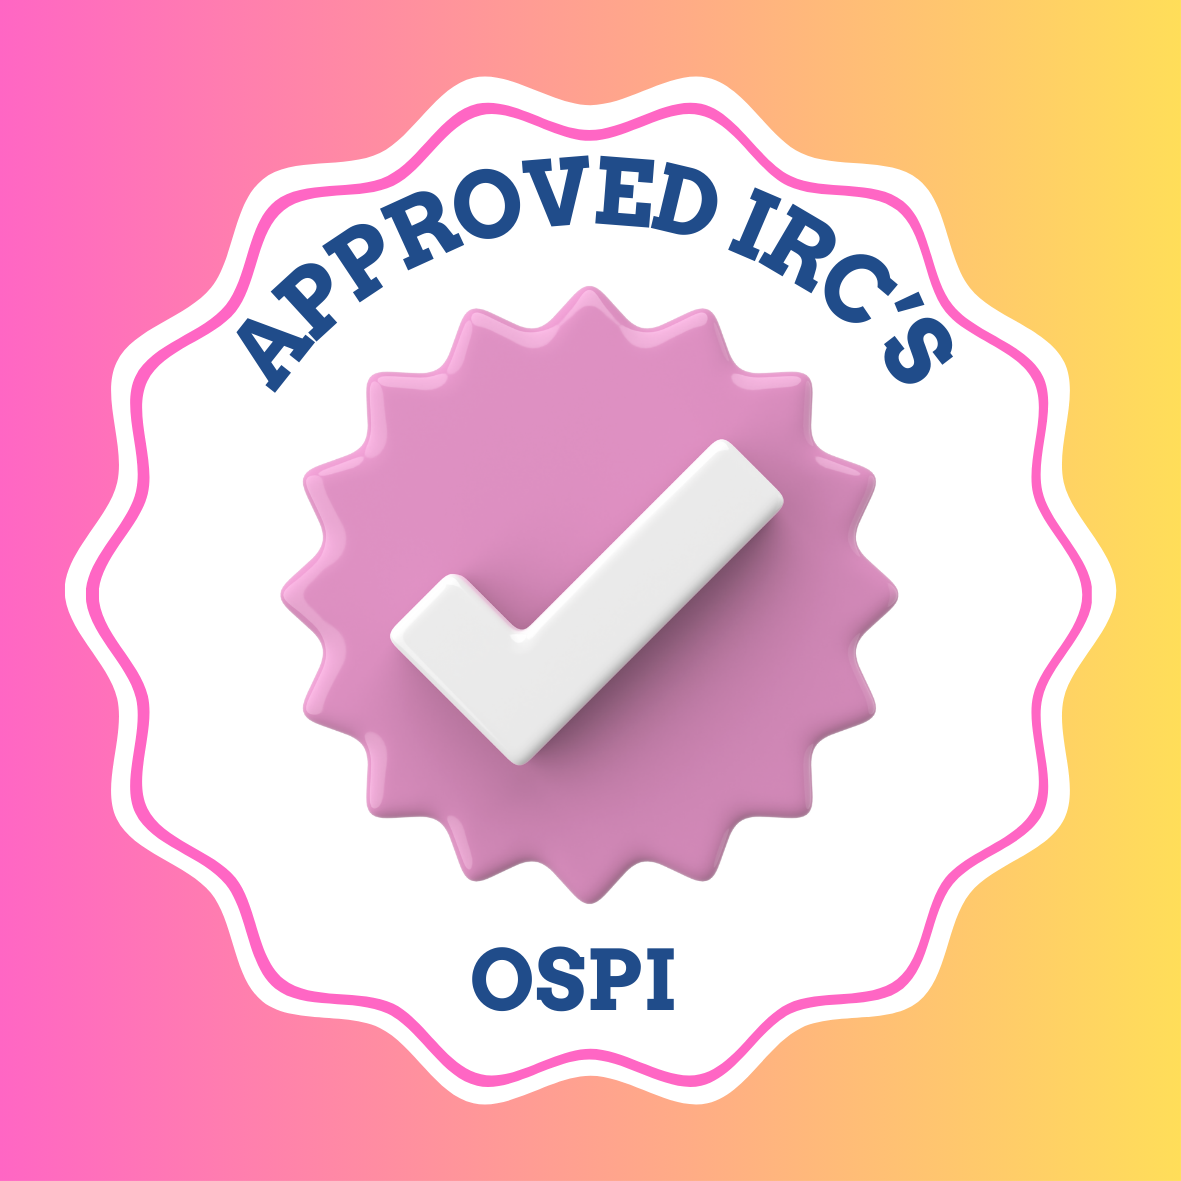 OSPI APPROVED IRC LIST